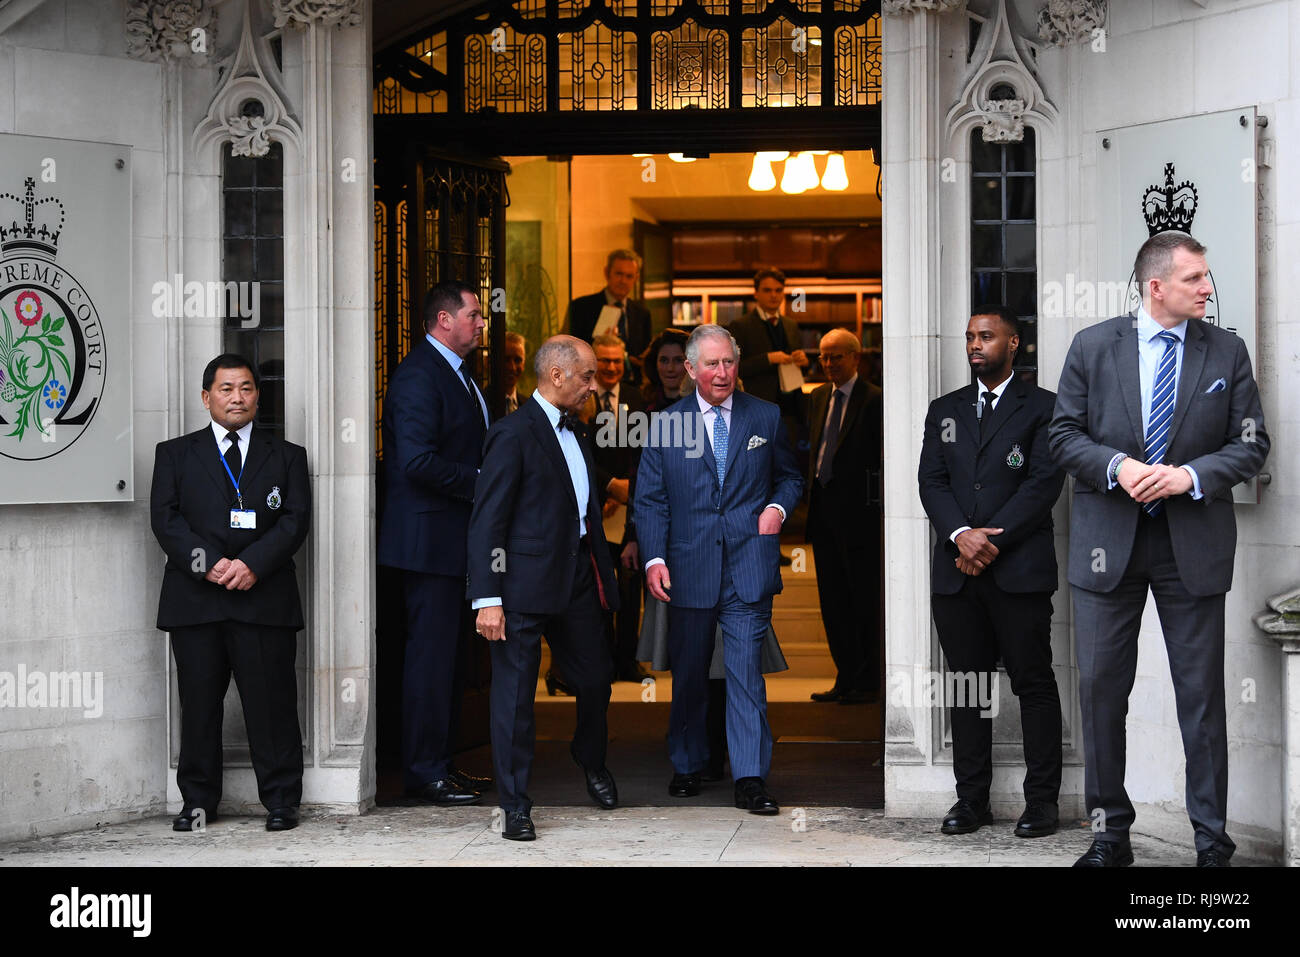 The Prince of Wales during a visit to The Supreme Court of the United Kingdom in Parliament Square, London, to commemorate its 10th anniversary. Stock Photo